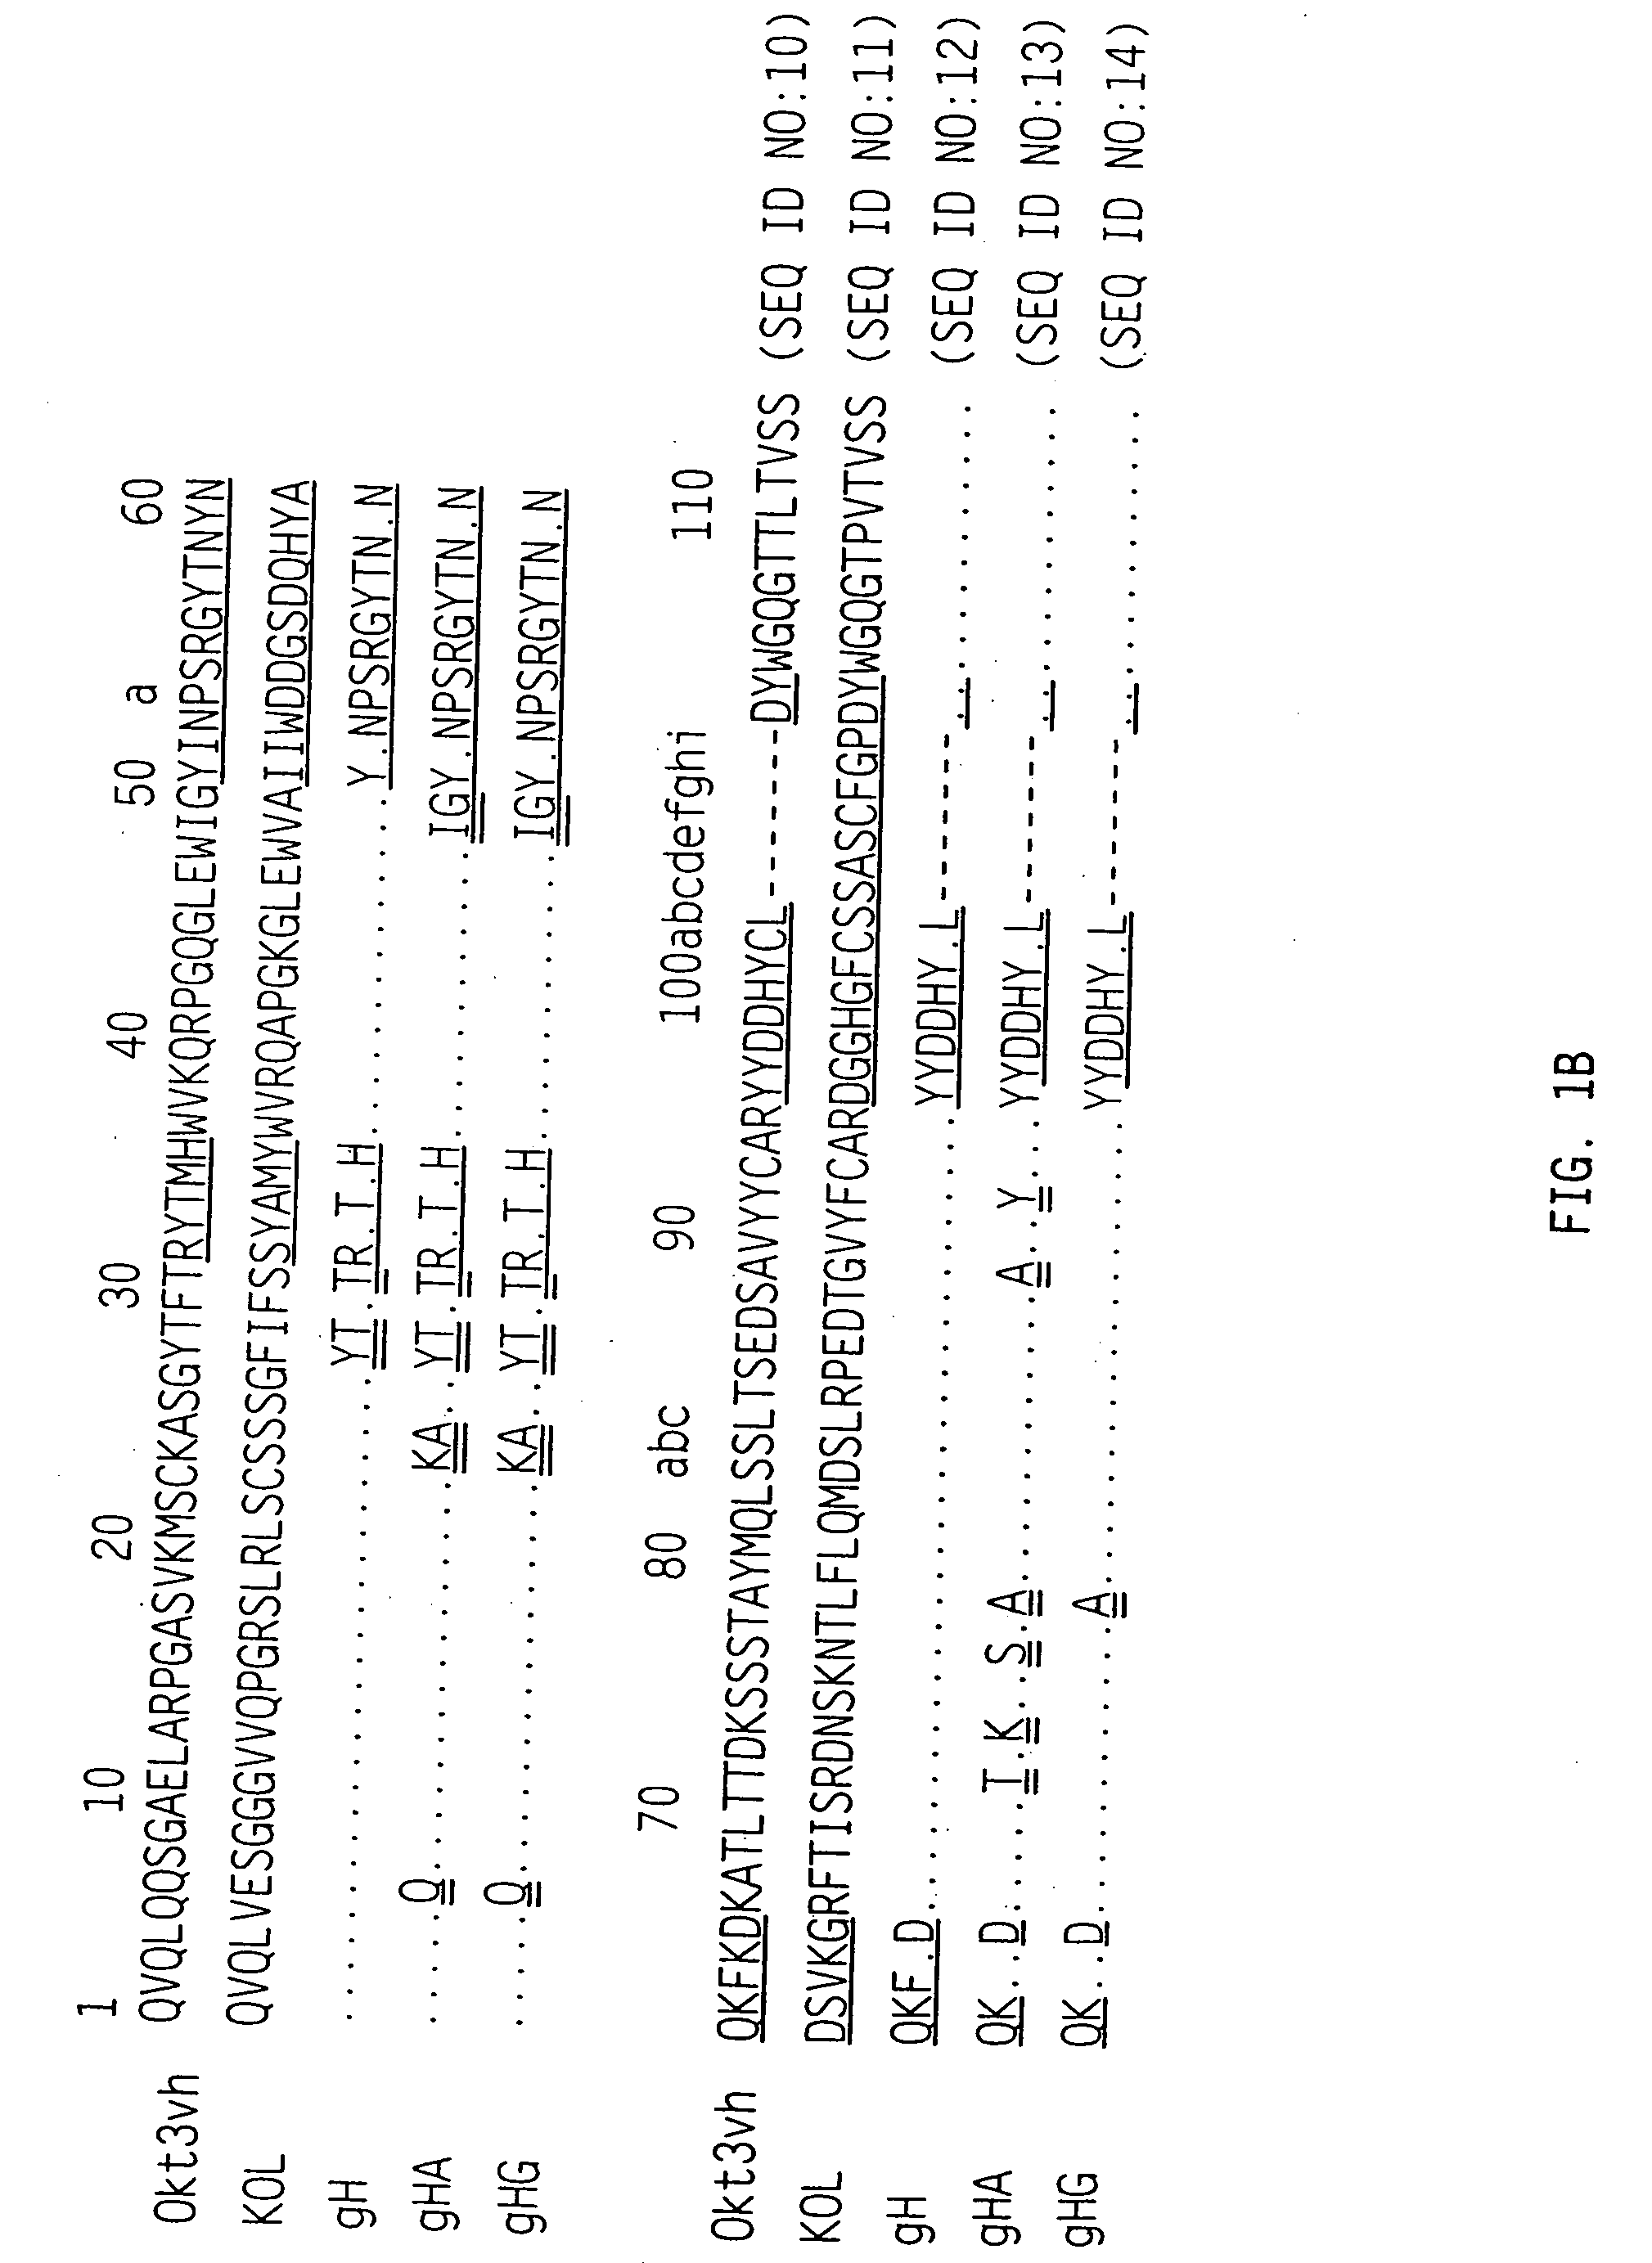 Methods and materials for modulation of the immunosuppressive activity and toxicity of monoclonal antibodies